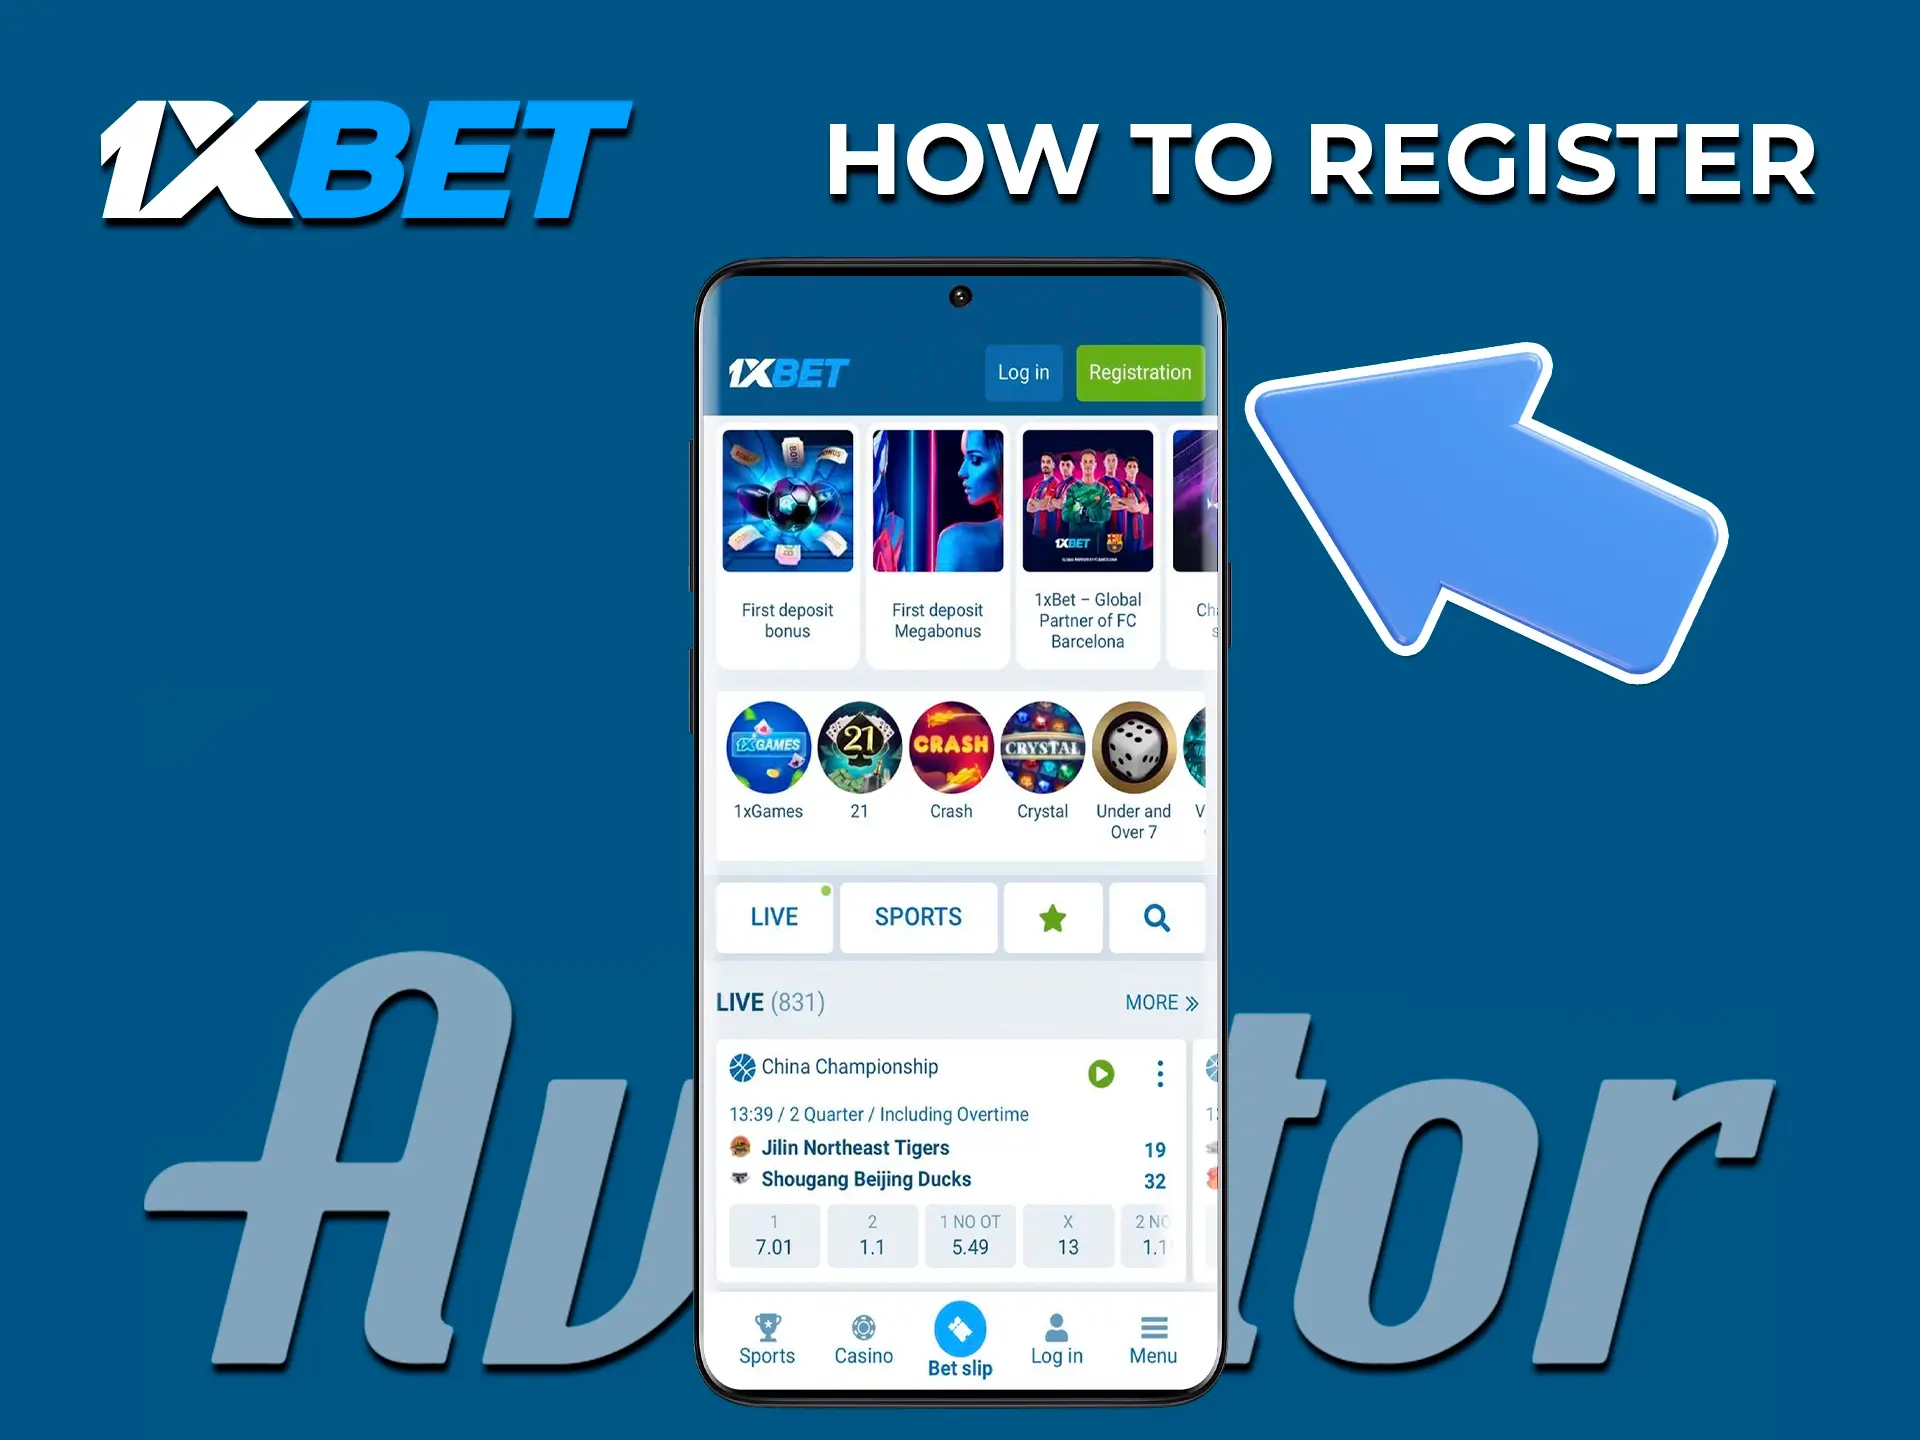 Carefully fill in all fields required for the registration form at 1xBet Casino.